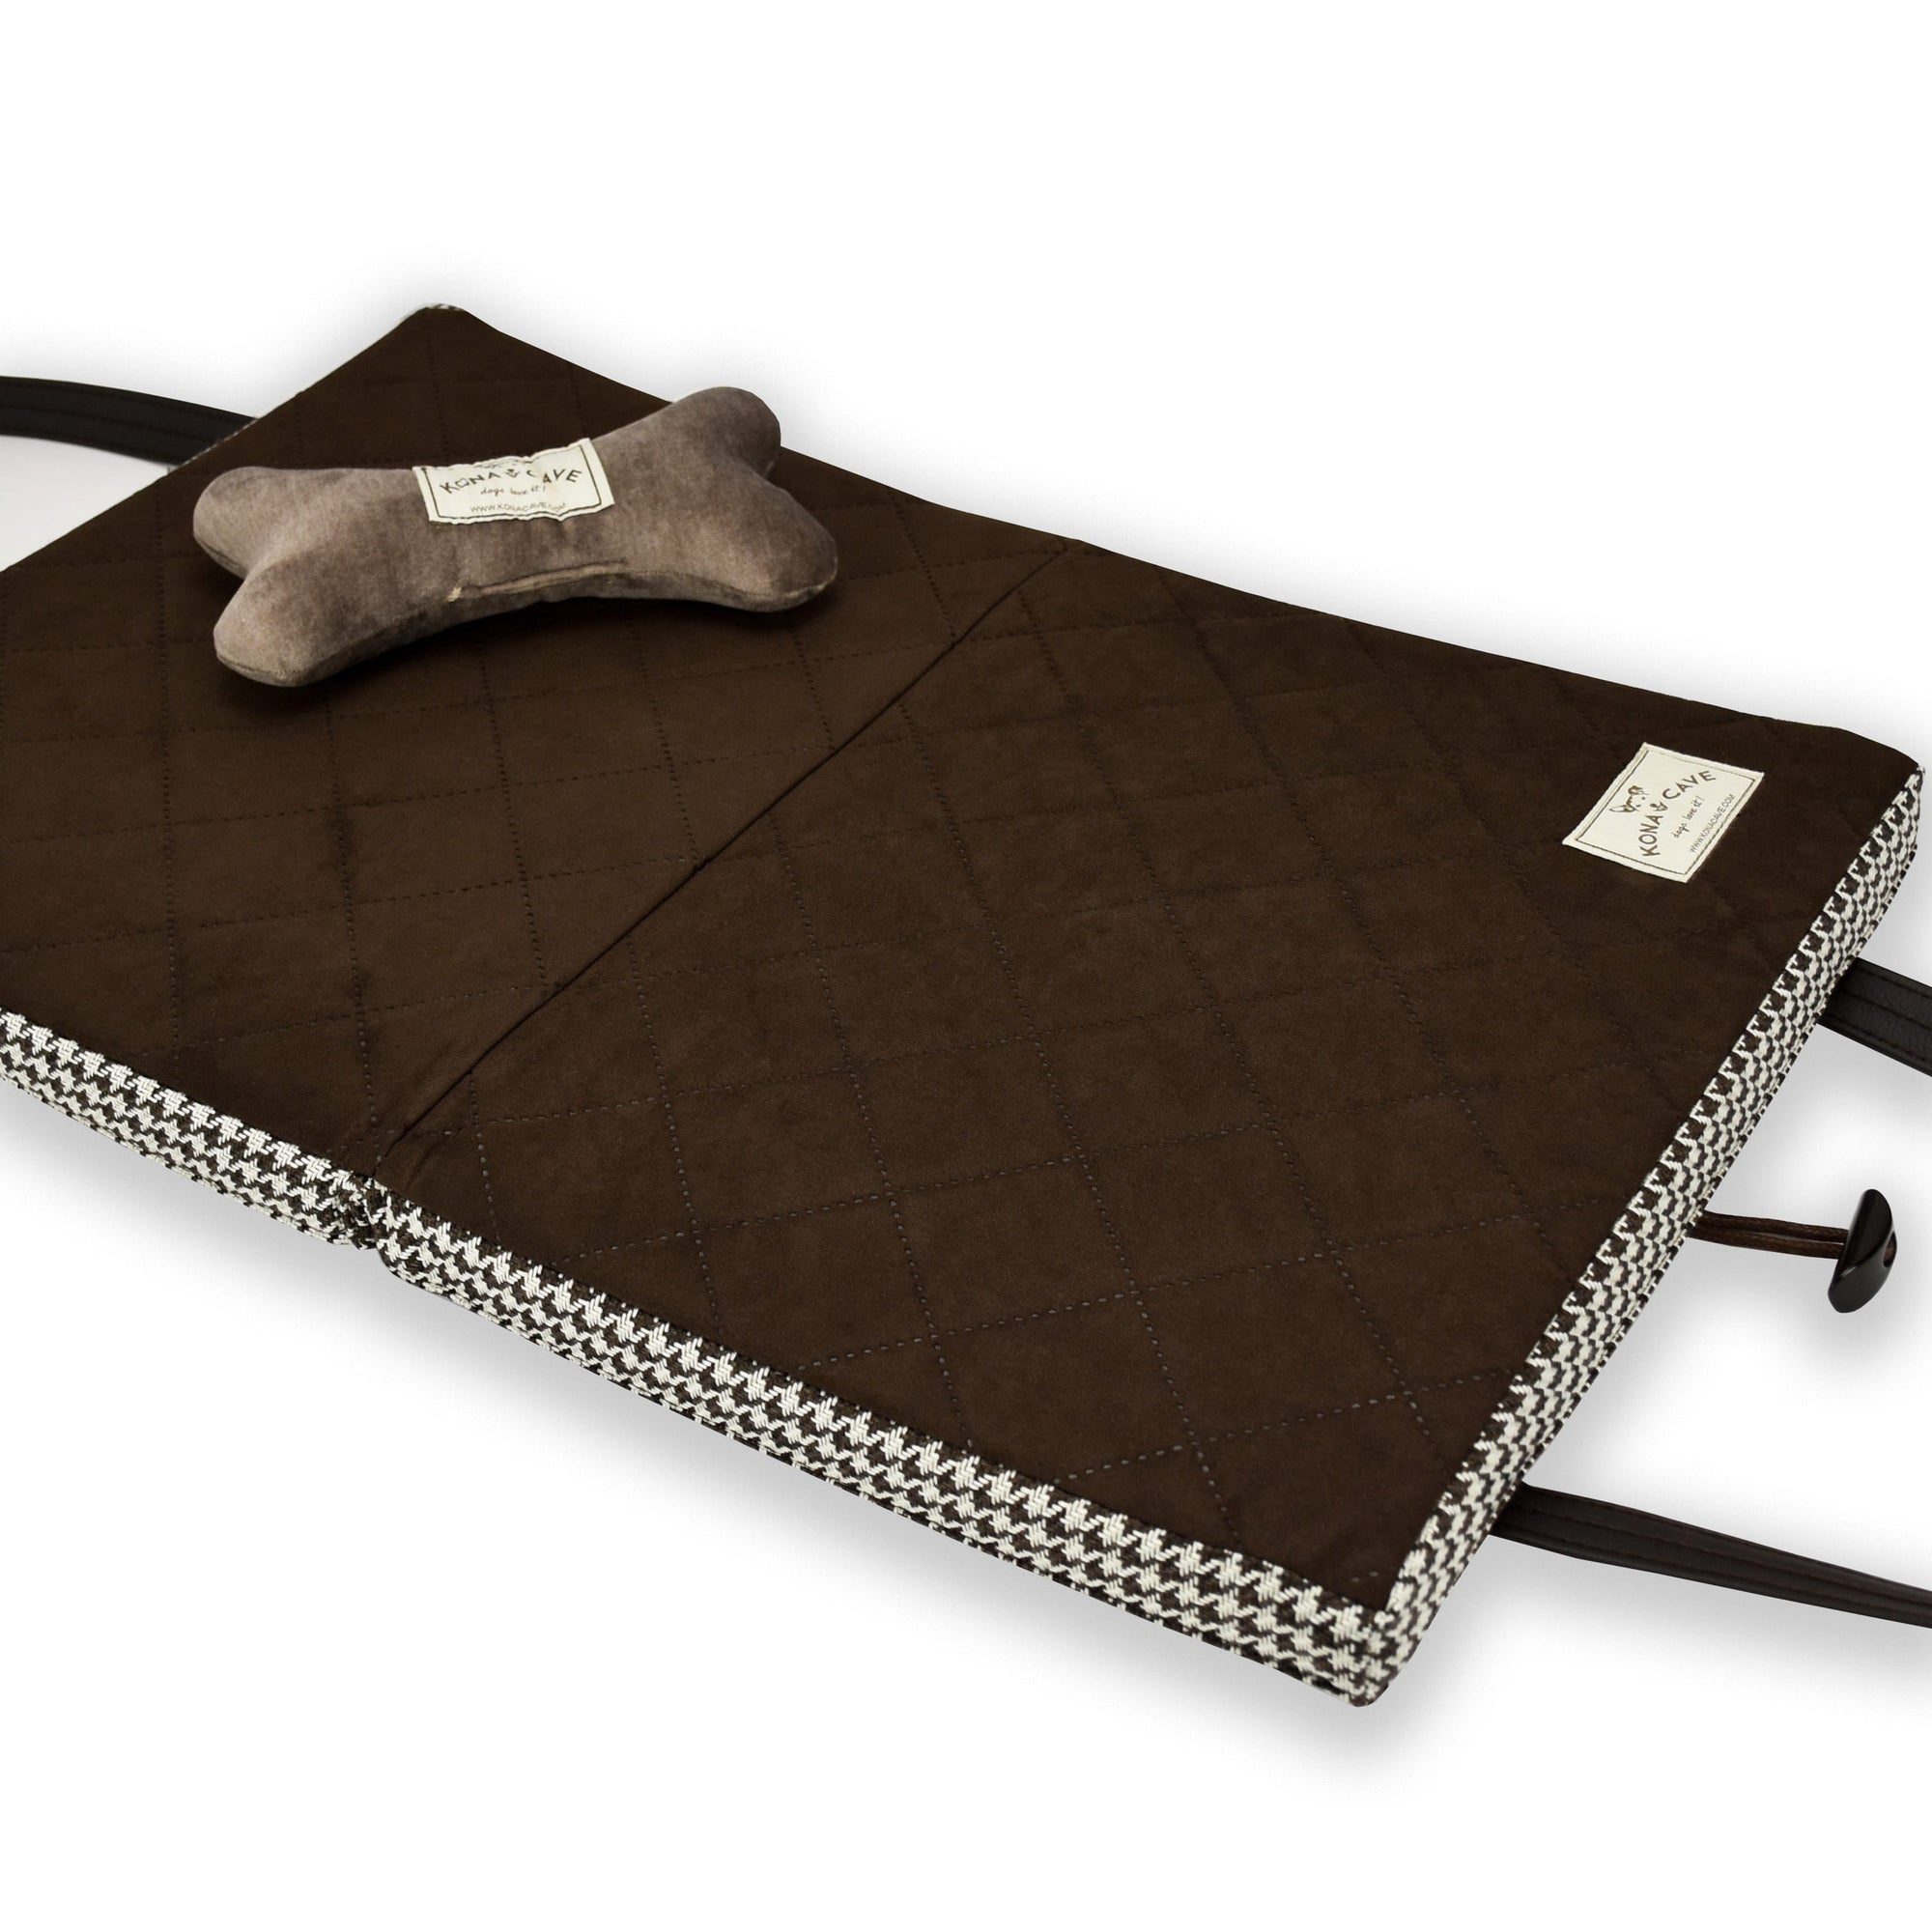 Brown quilted ultra-suede lining of the KONA CAVE® Travel Dog Bed with a velvet toy dog bone